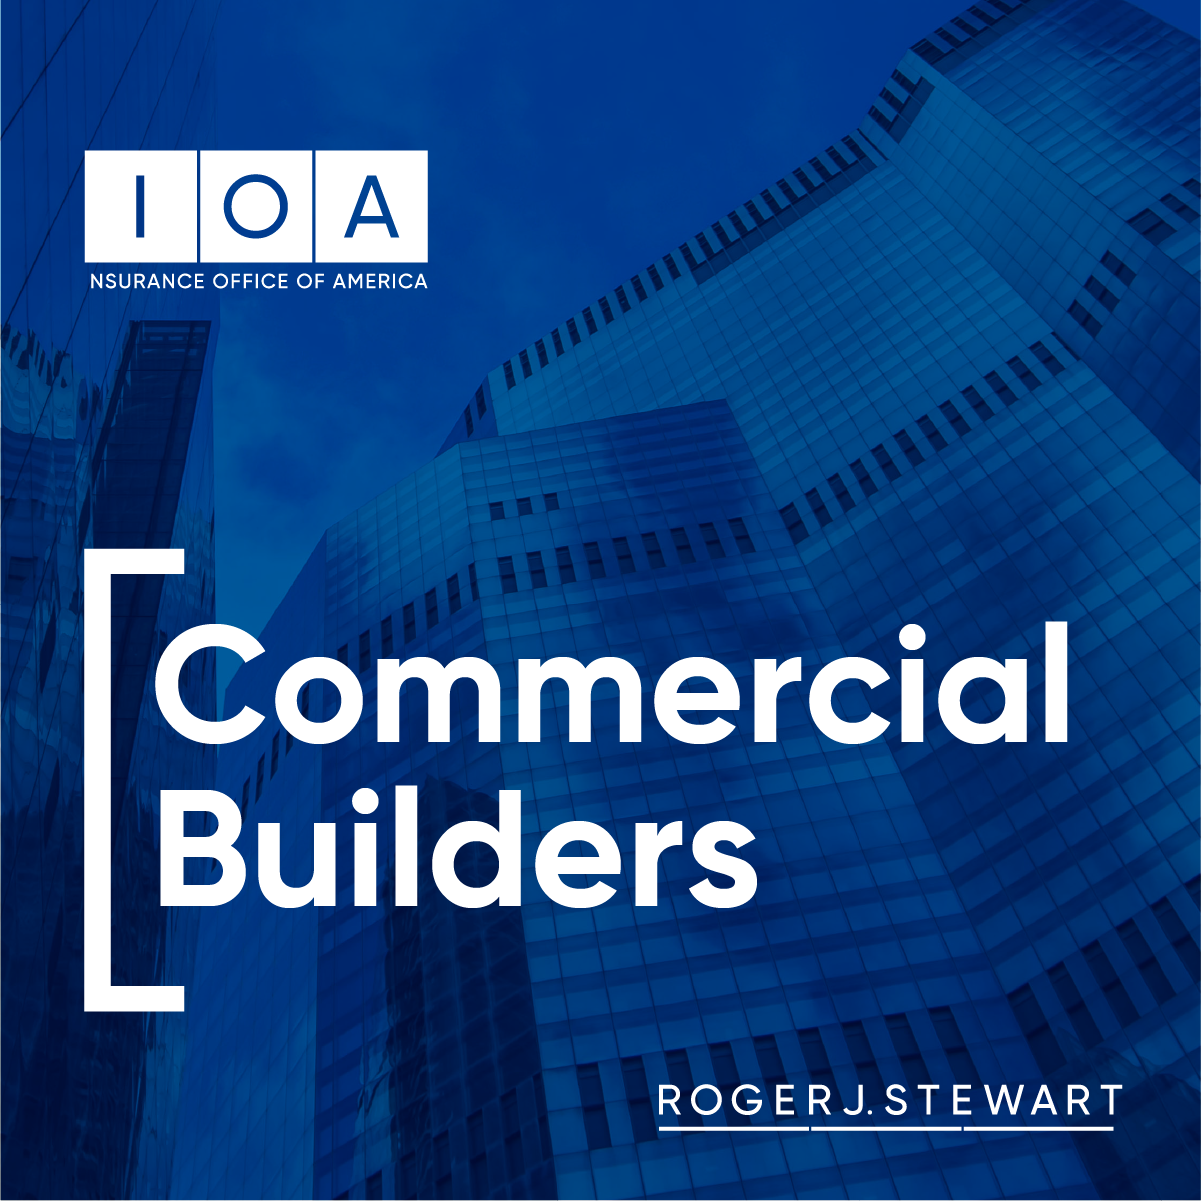 Commercial building industry risk management and insurance